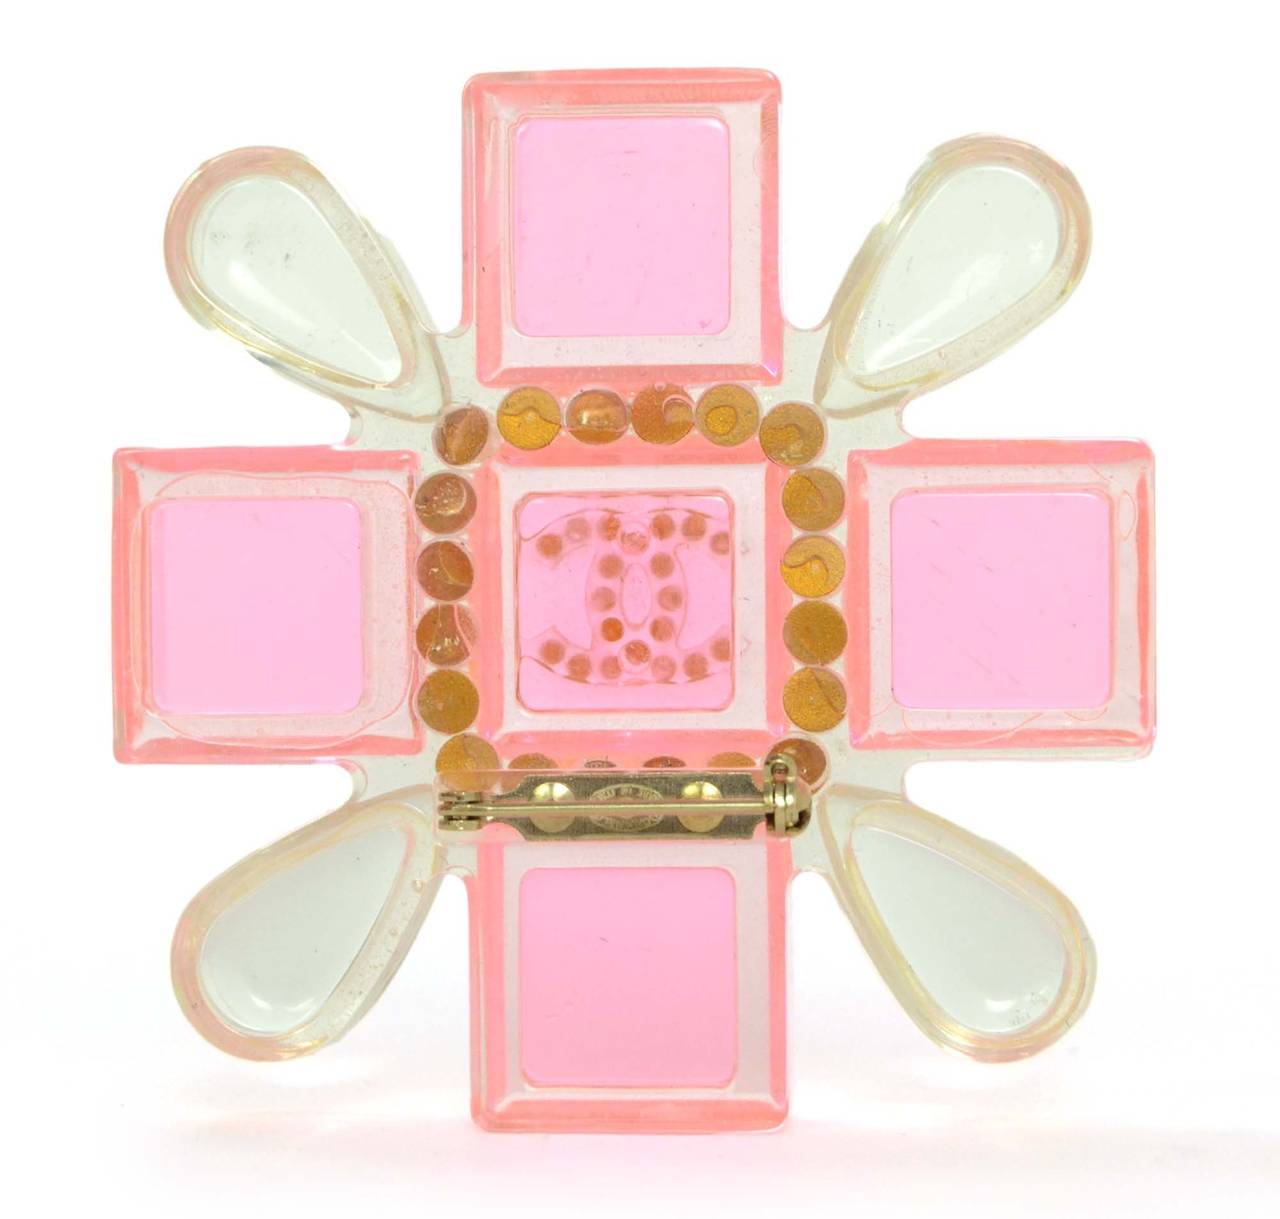 Chanel Pink & Clear Resin Cross Brooch
Features clear resin beads framing rhinestone CC center
Made in: Italy
Year of Production: 2004
Stamp: 04 CC A
Closure: Pin back closure
Color: Pink and clear
Materials: Resin, rhinestones and metal
Overall